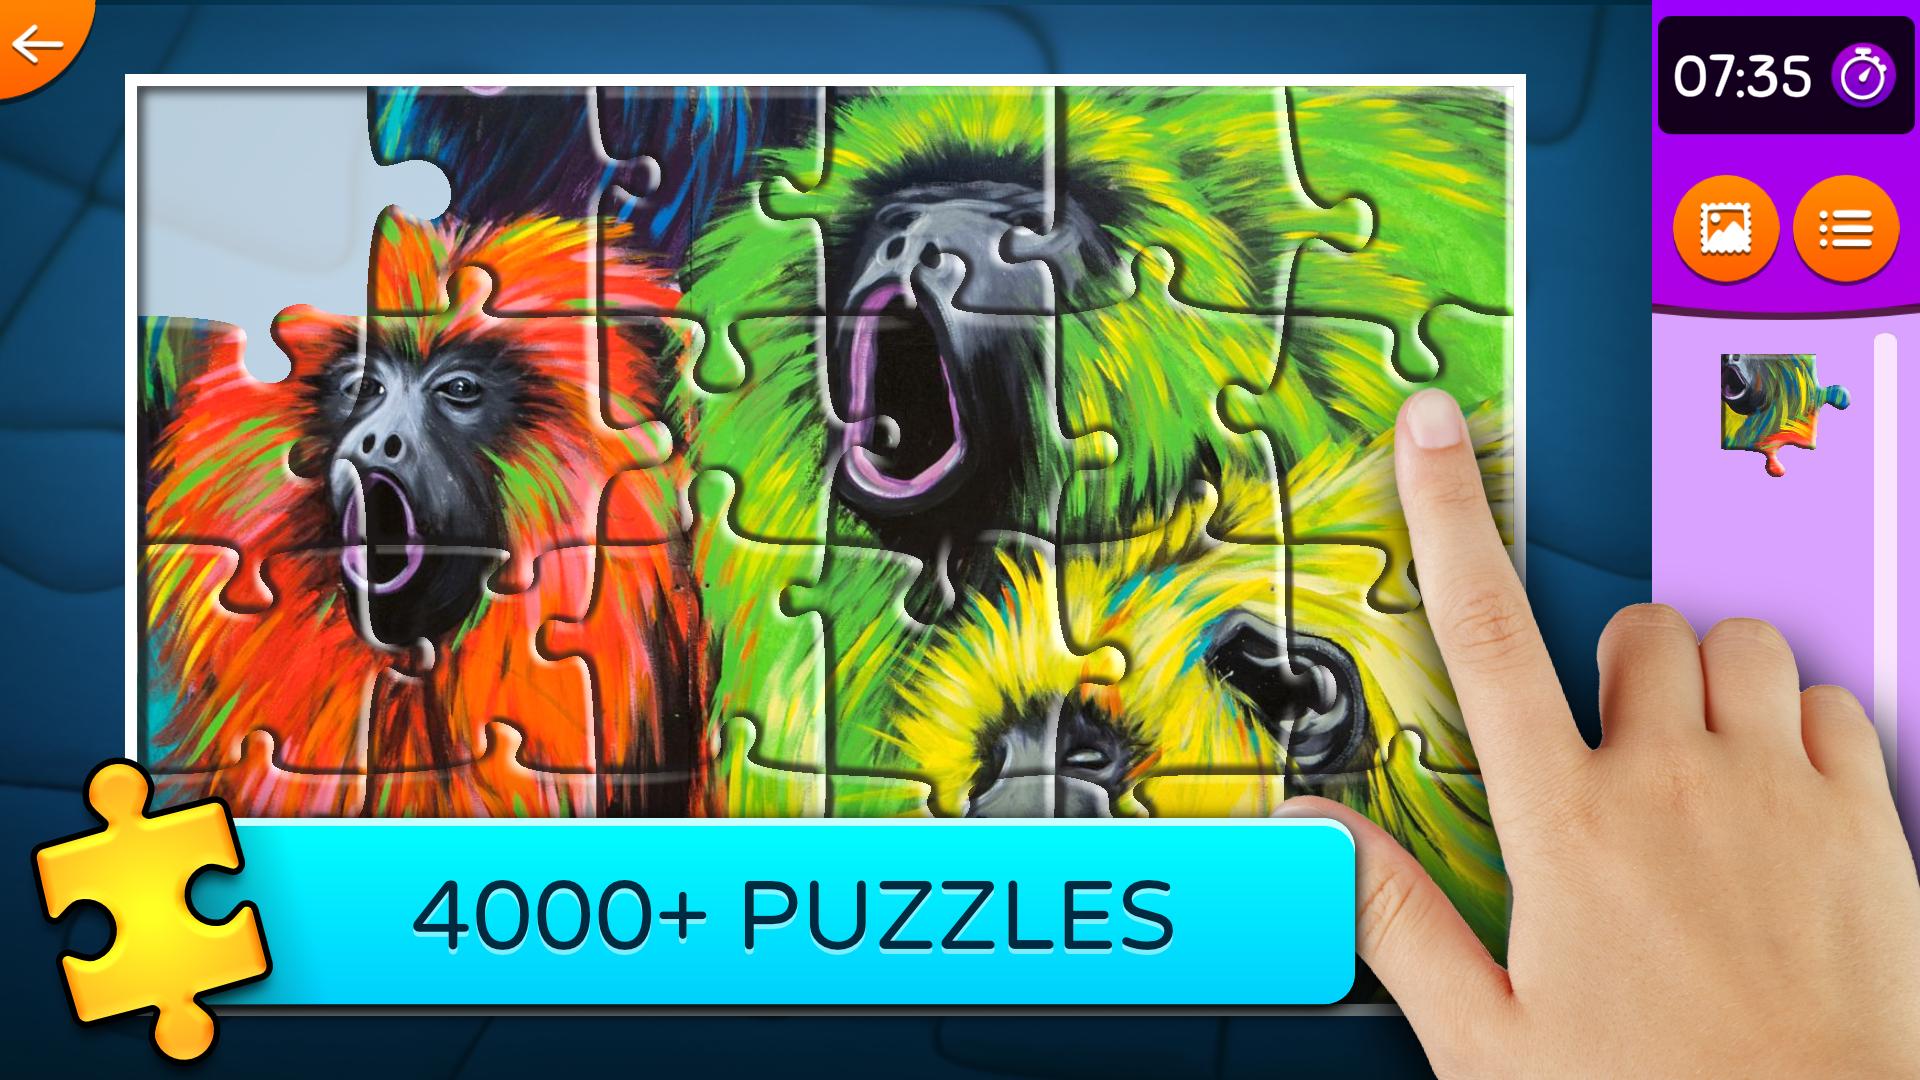 Jigsaw Puzzles Classic - Rompecabezas for Android - APK Download